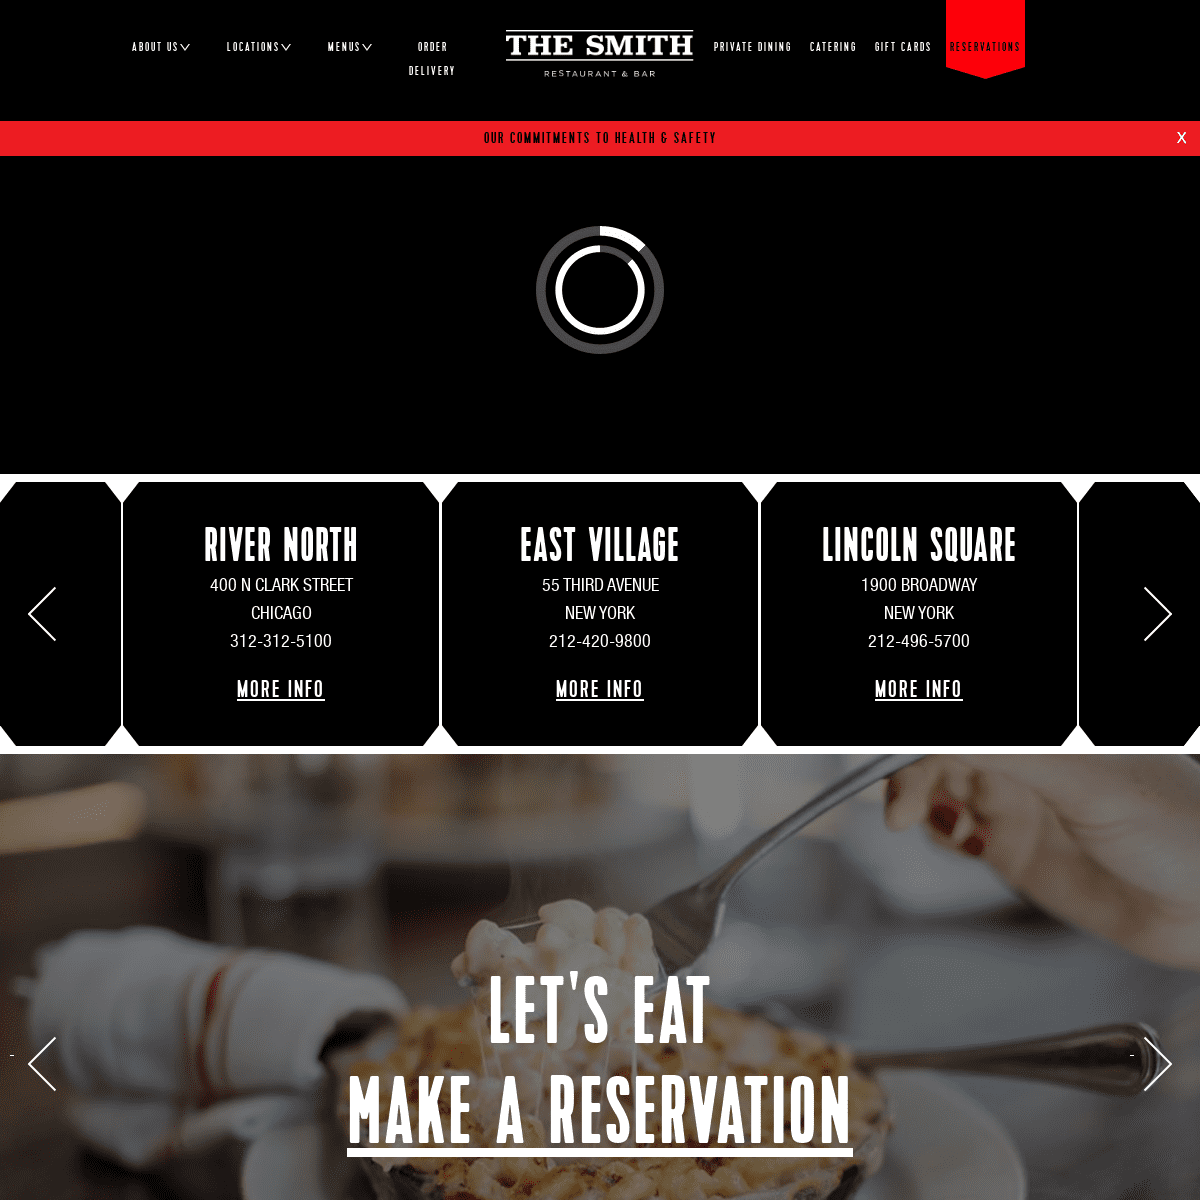 A complete backup of https://thesmithrestaurant.com